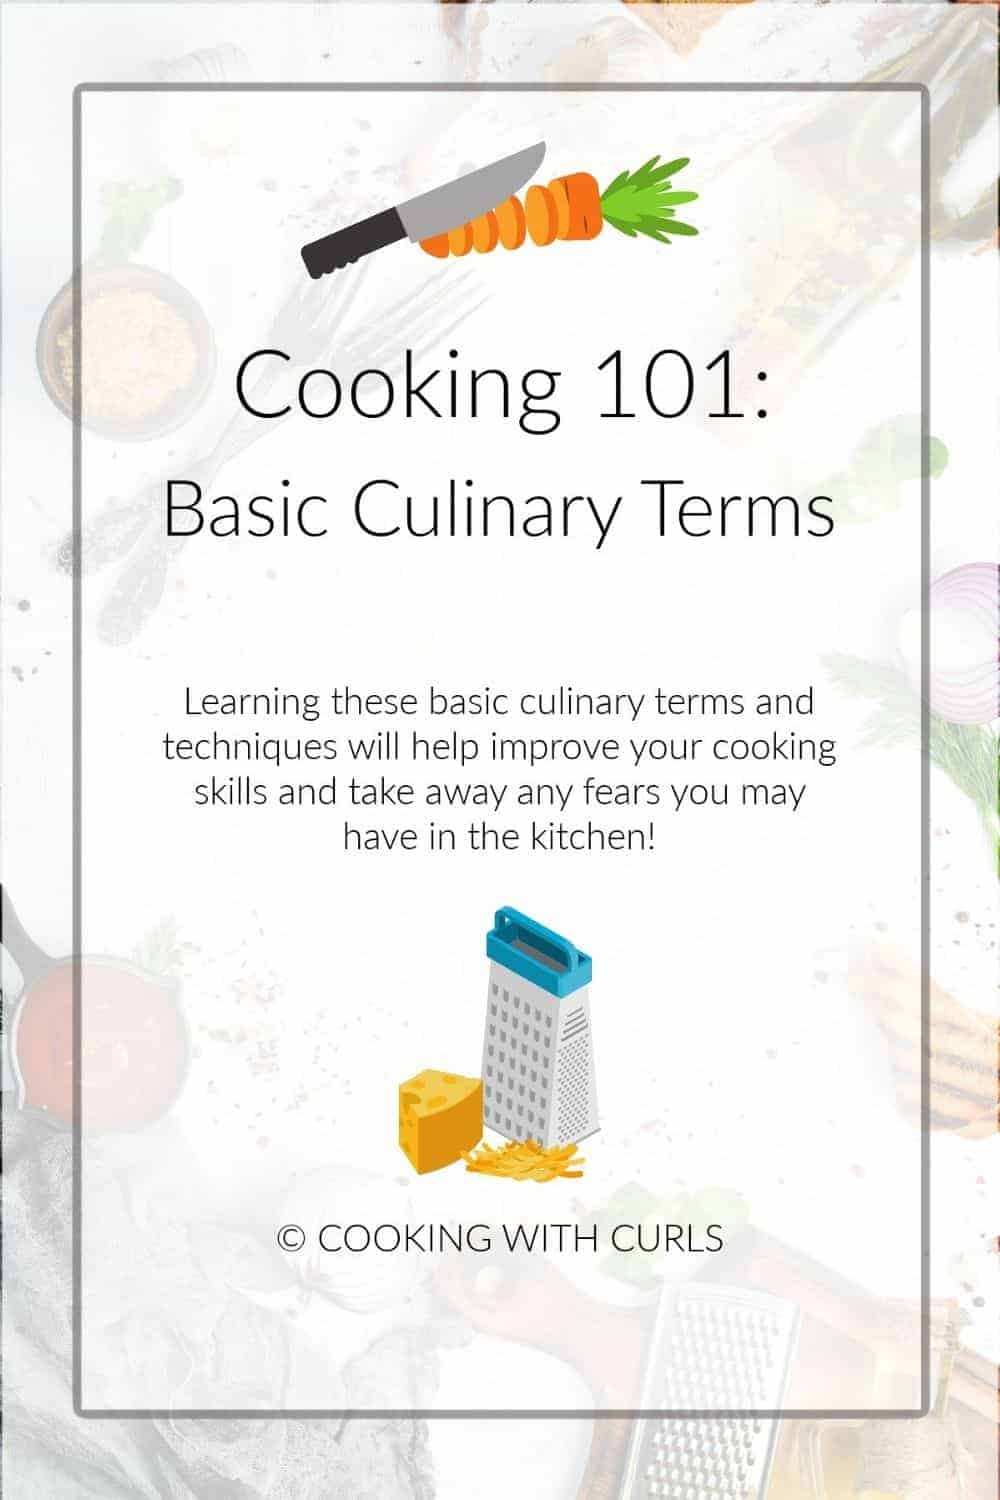 Cooking 101: Basic Culinary Terms graphic image with a knife cutting a carrot and a grater with Swiss cheese.